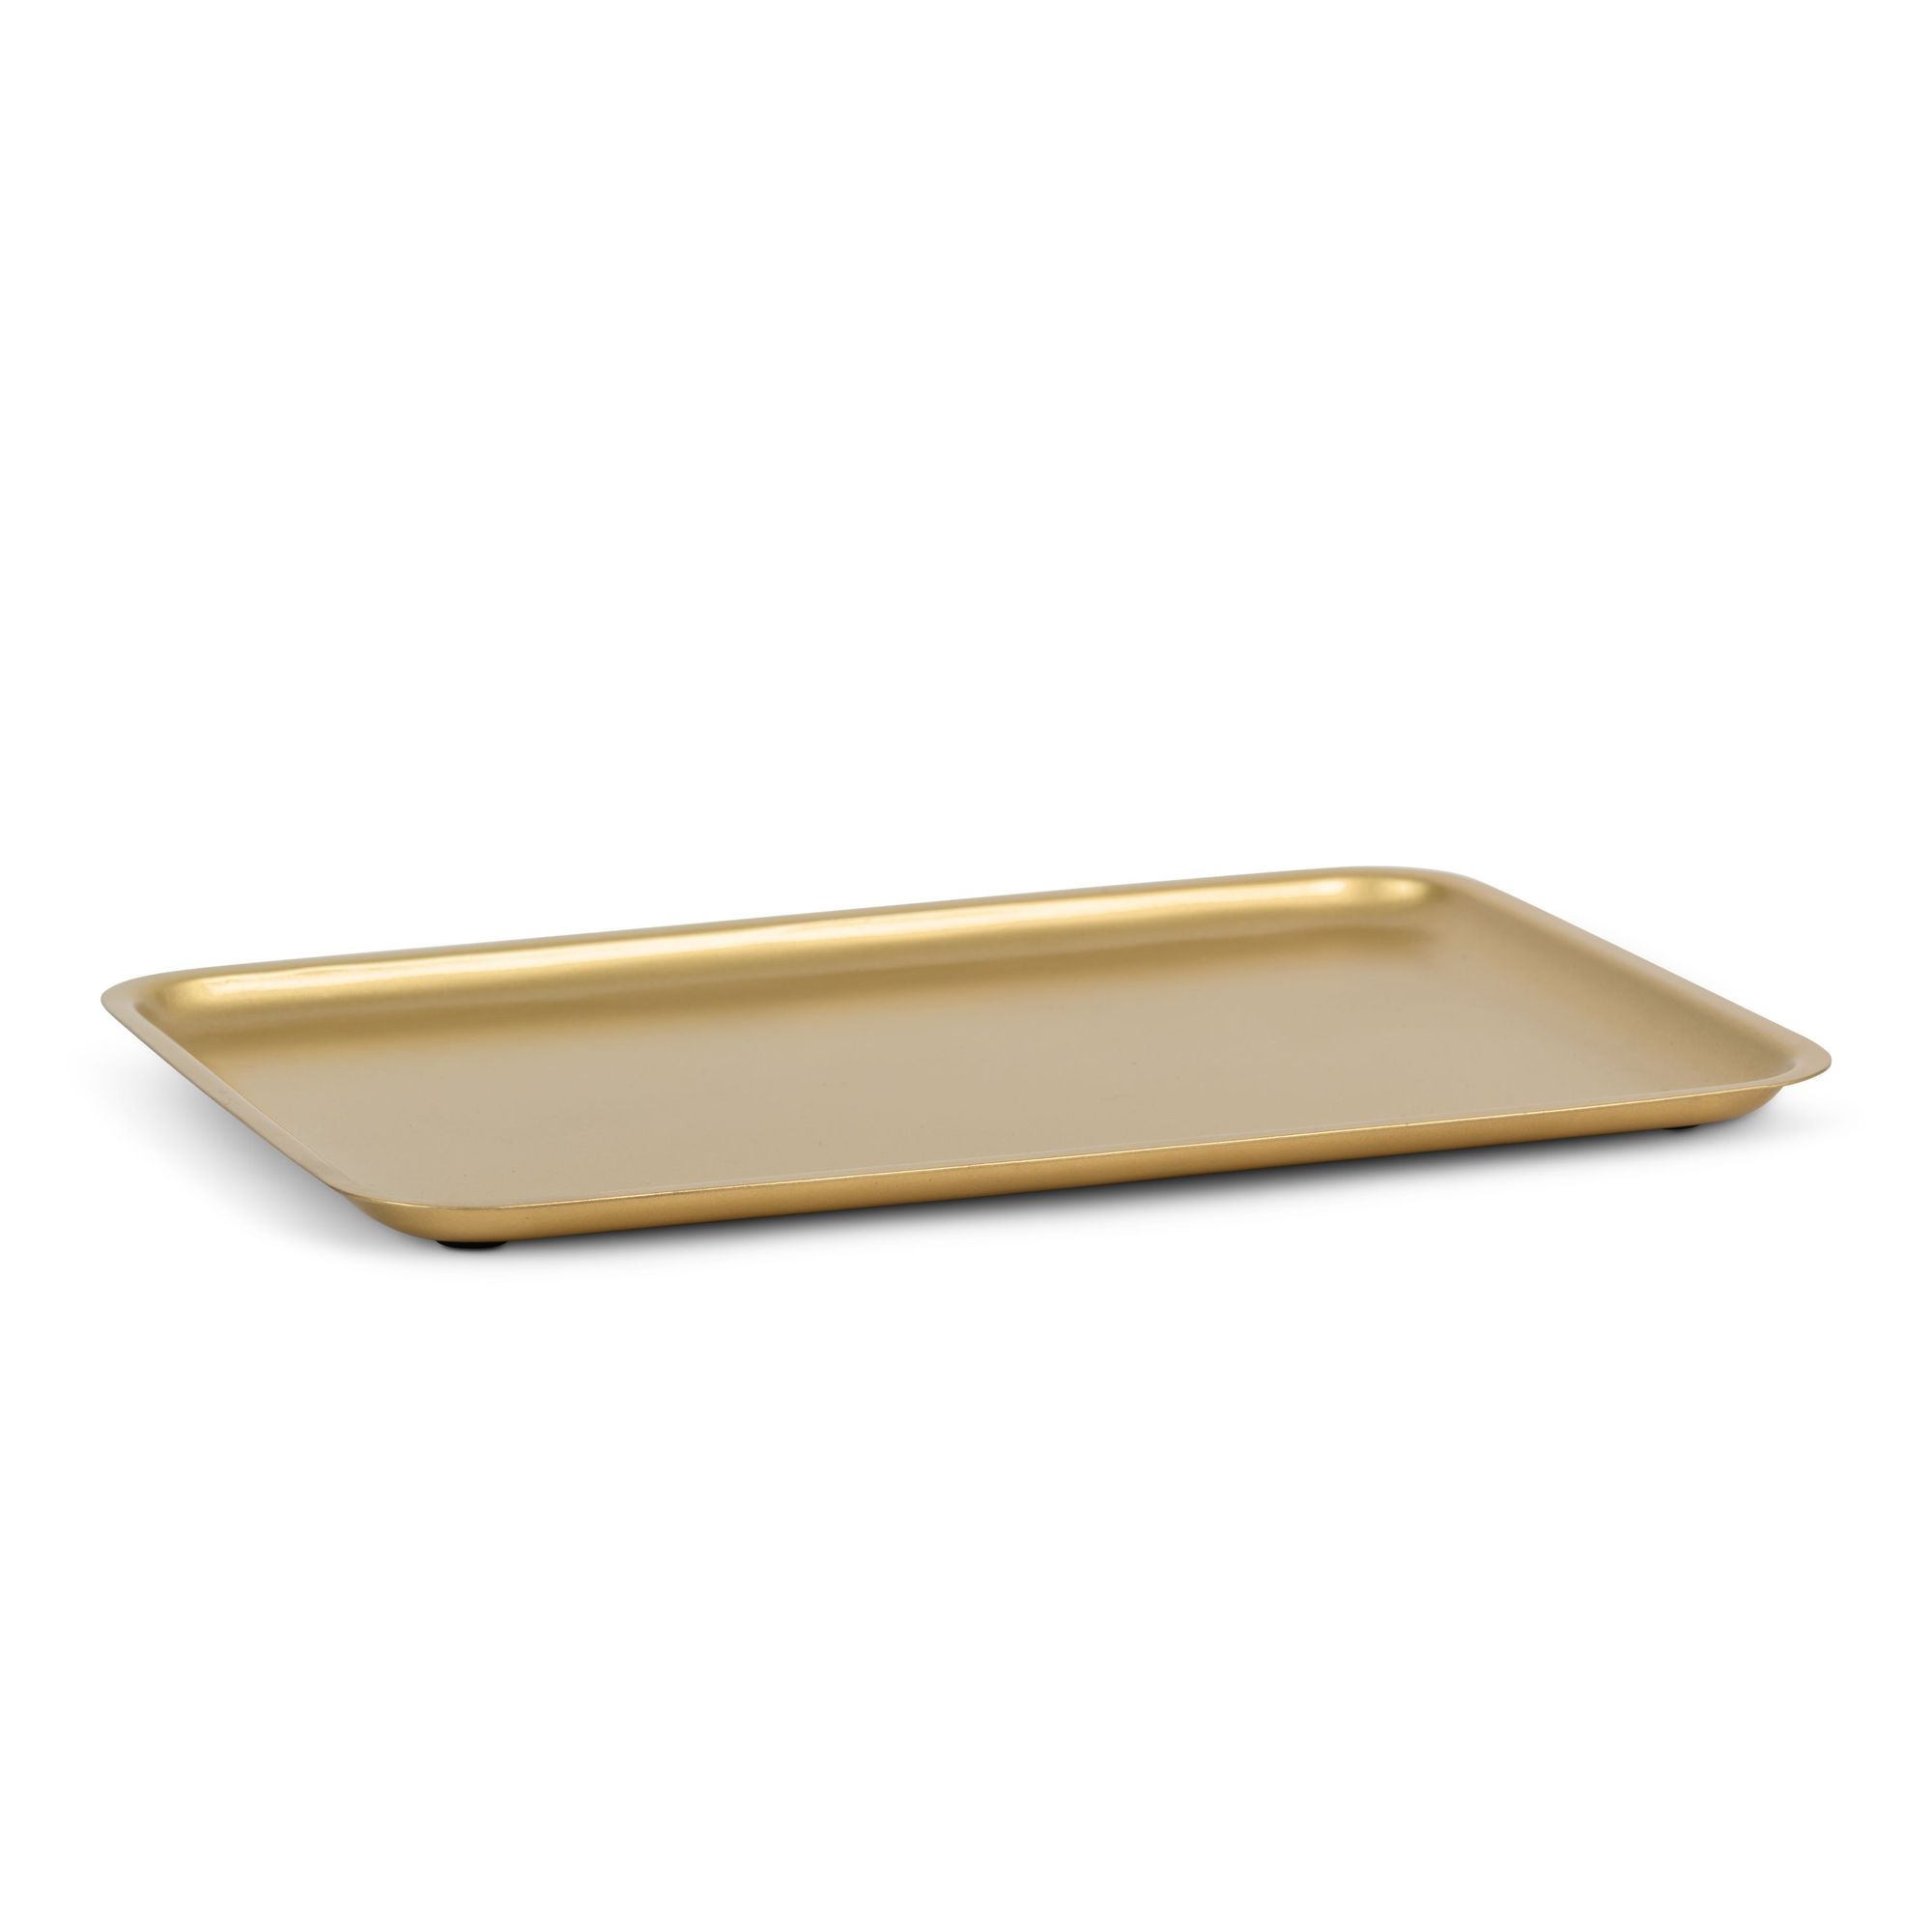 Unc Good Morning Serving Tray Gold Gift